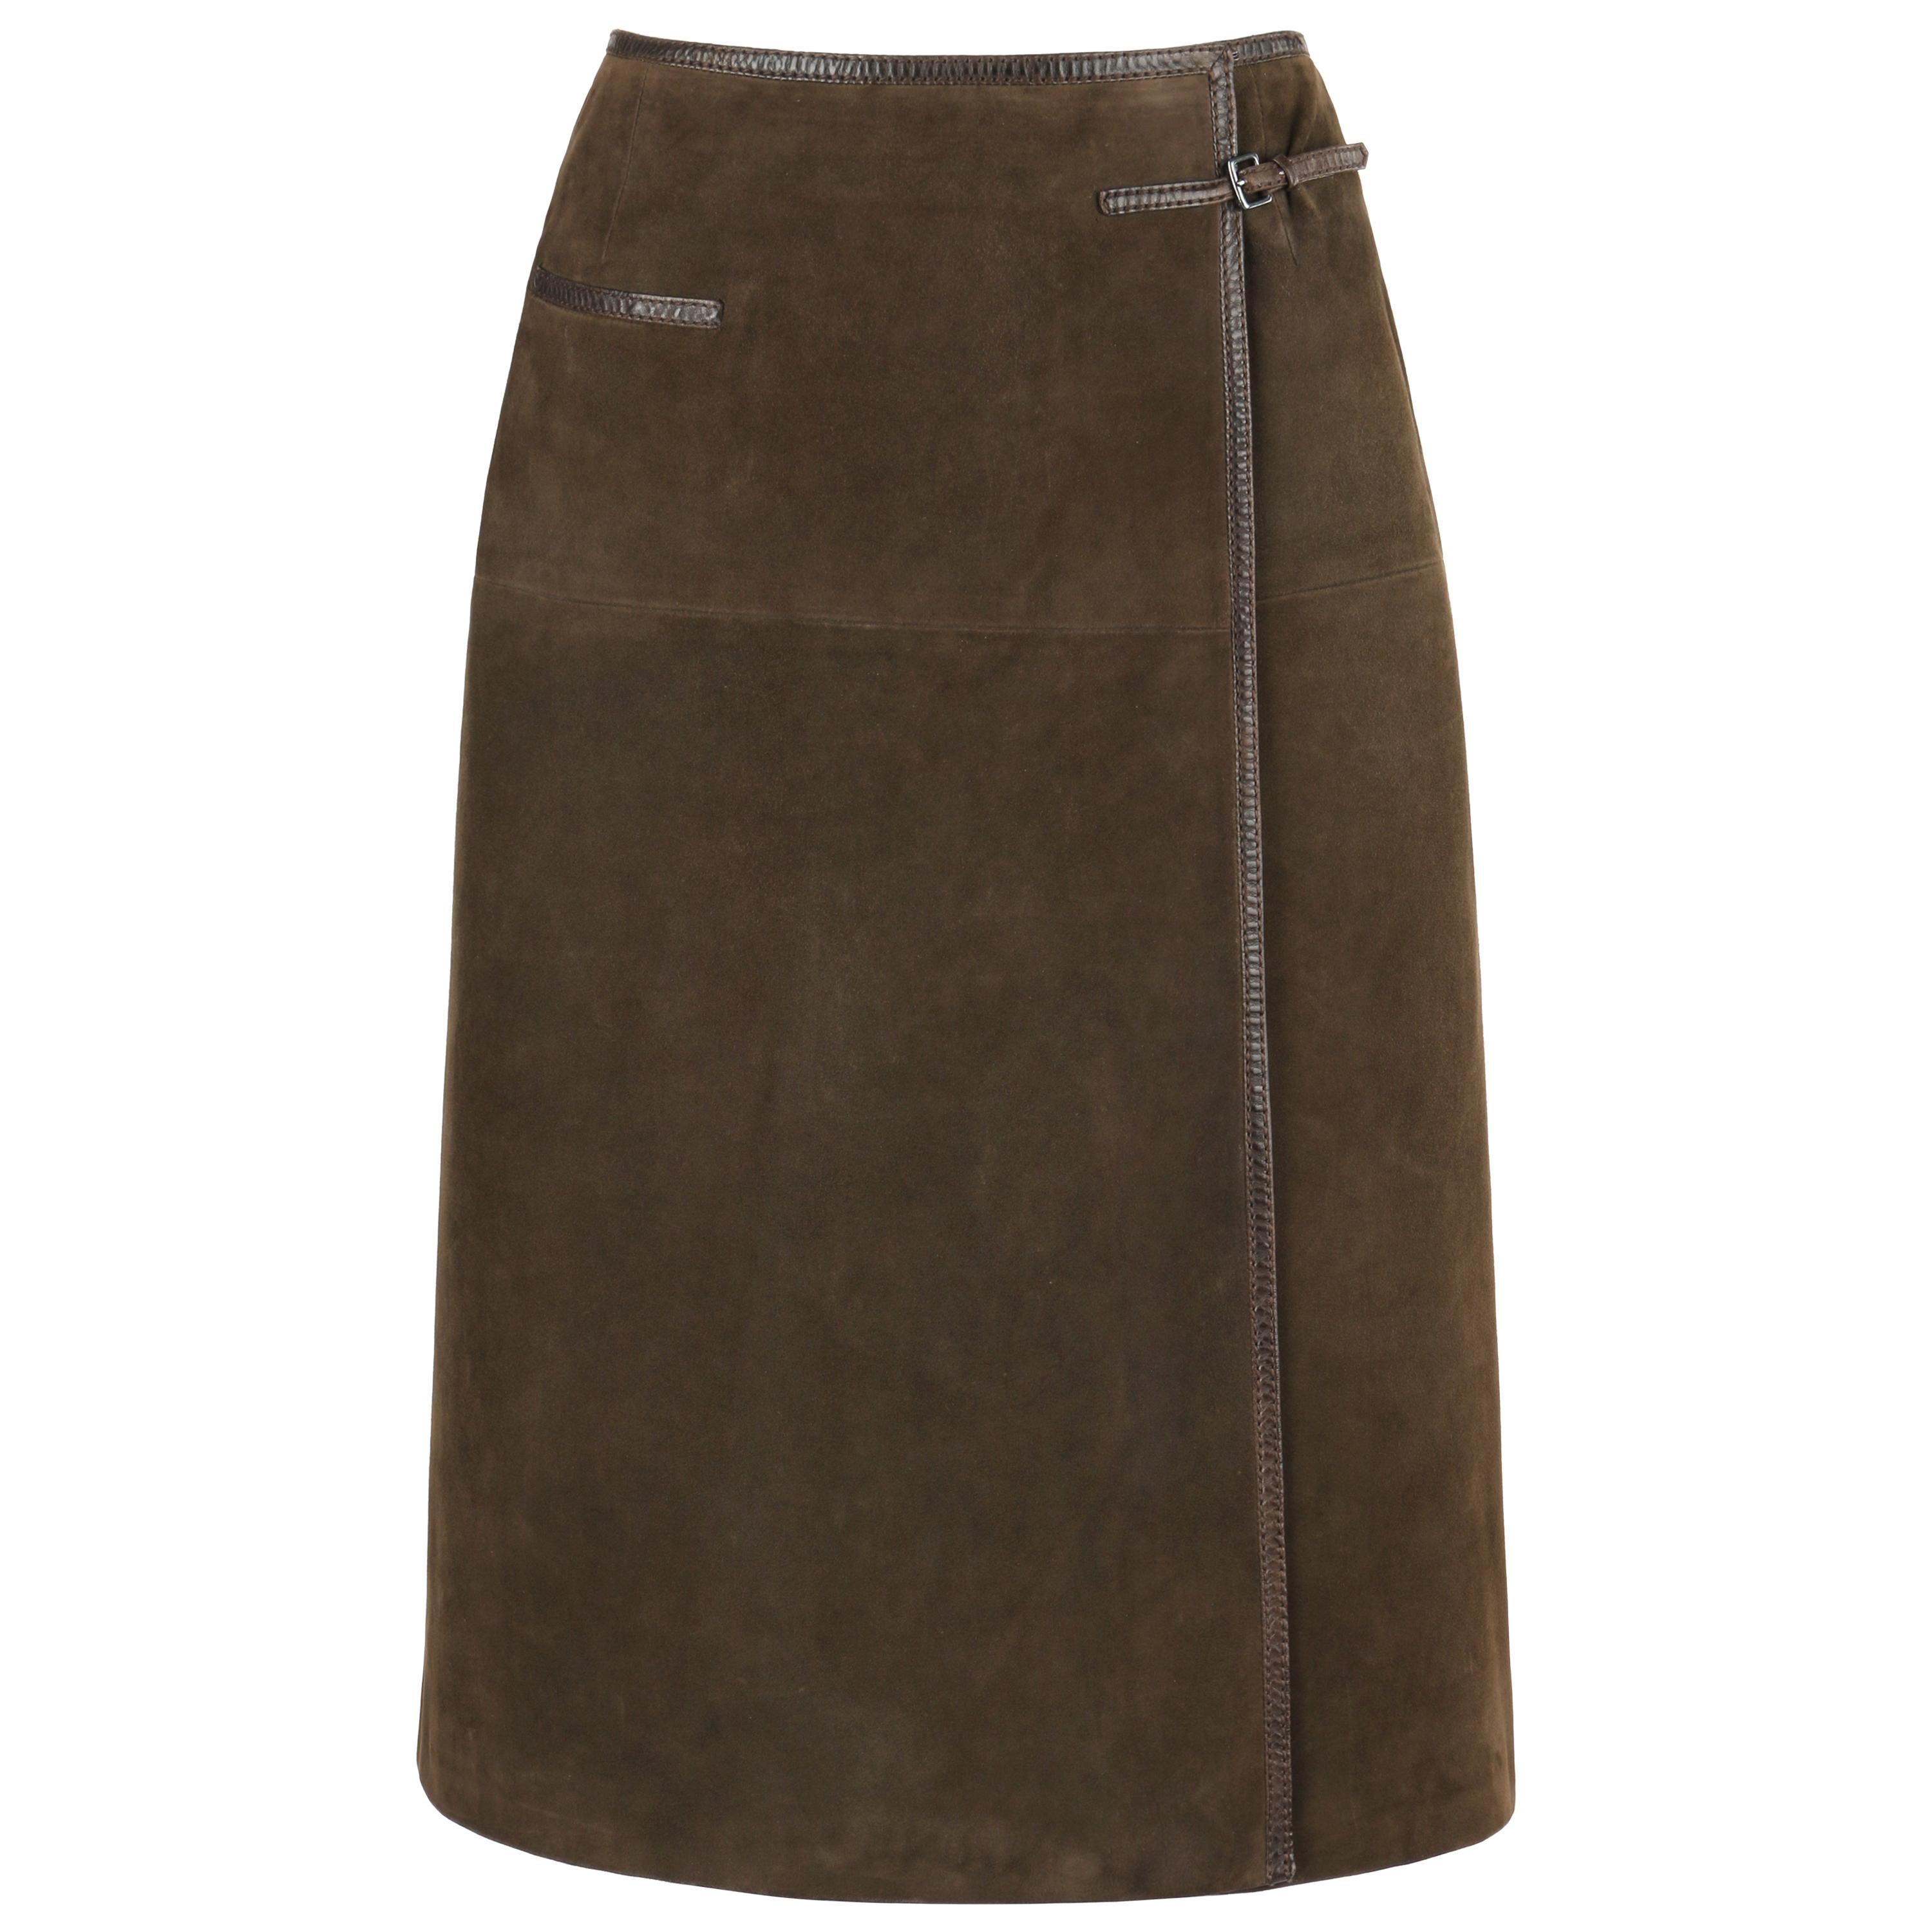 HERMES Sport c.1970's Brown Suede Classic Leather Wrap Skirt